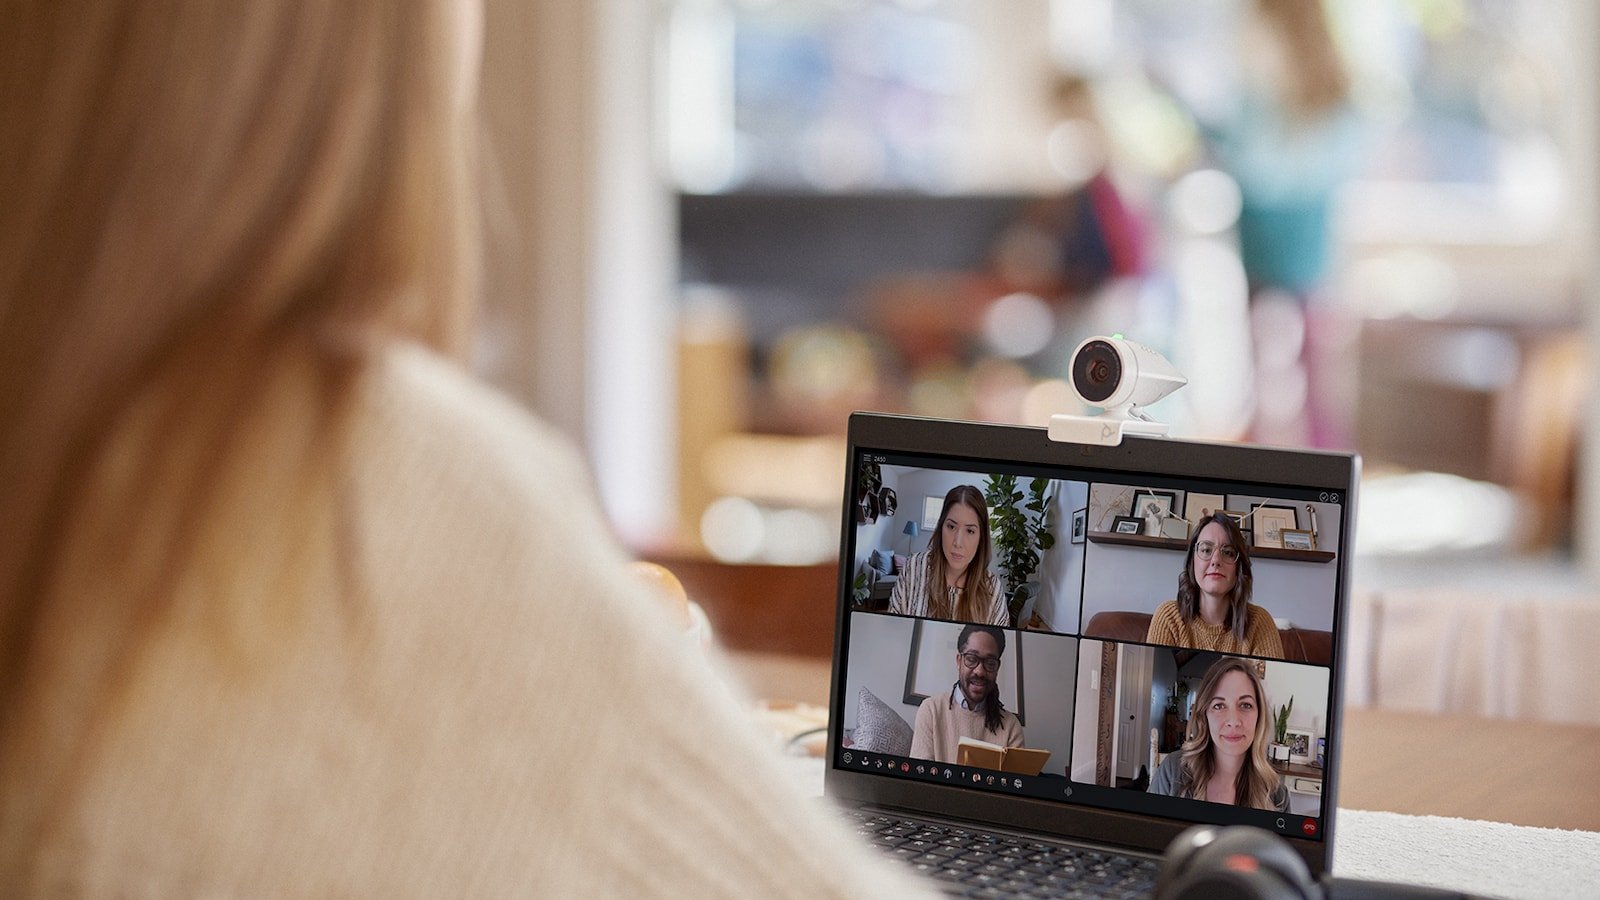 Poly Studio P5 professional webcam ensures you look great on video calls